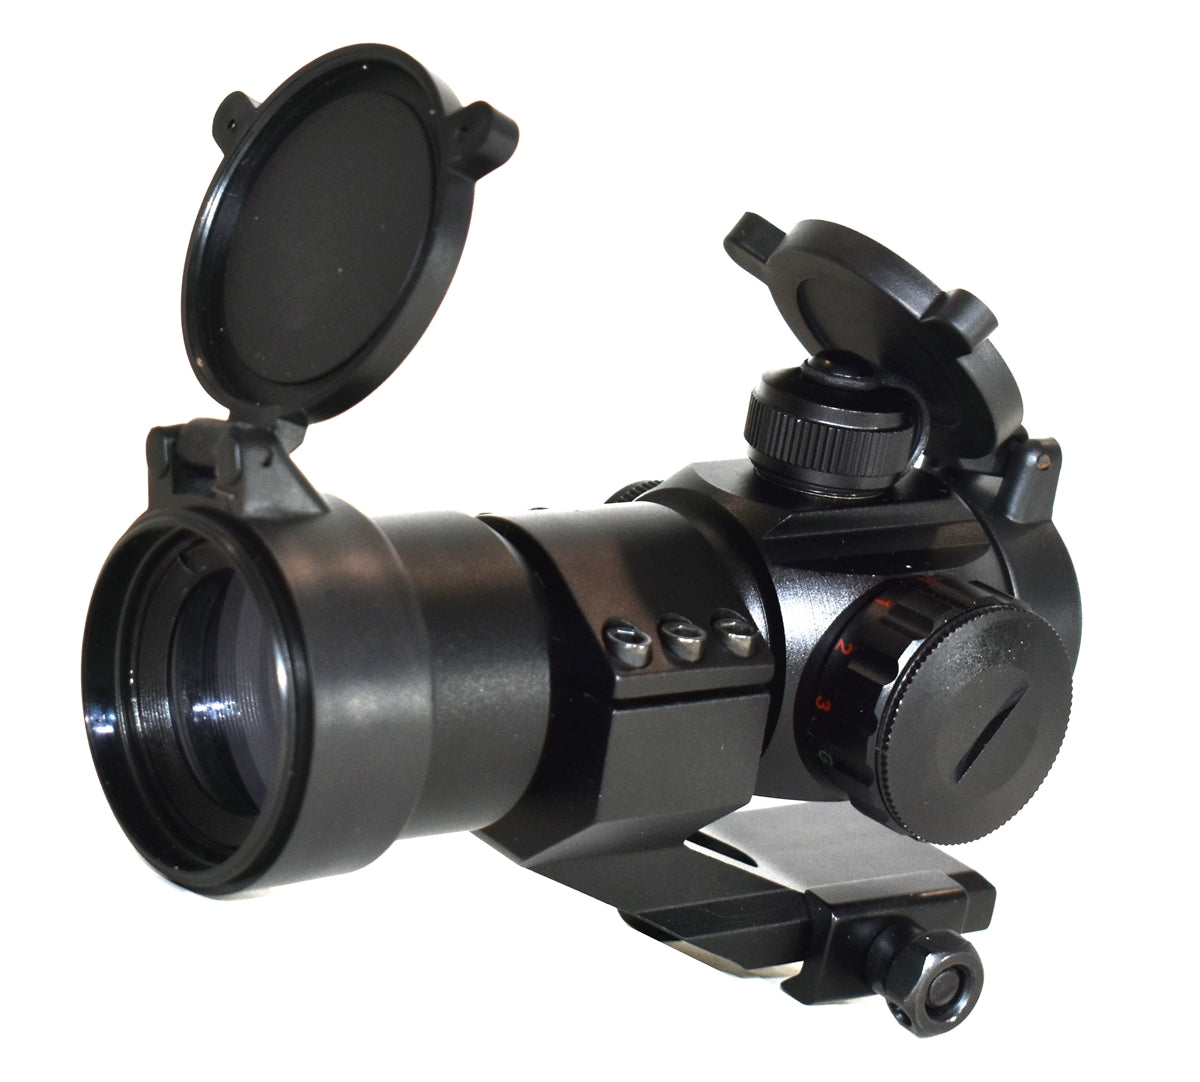 picatinny mounted sight for rifles.